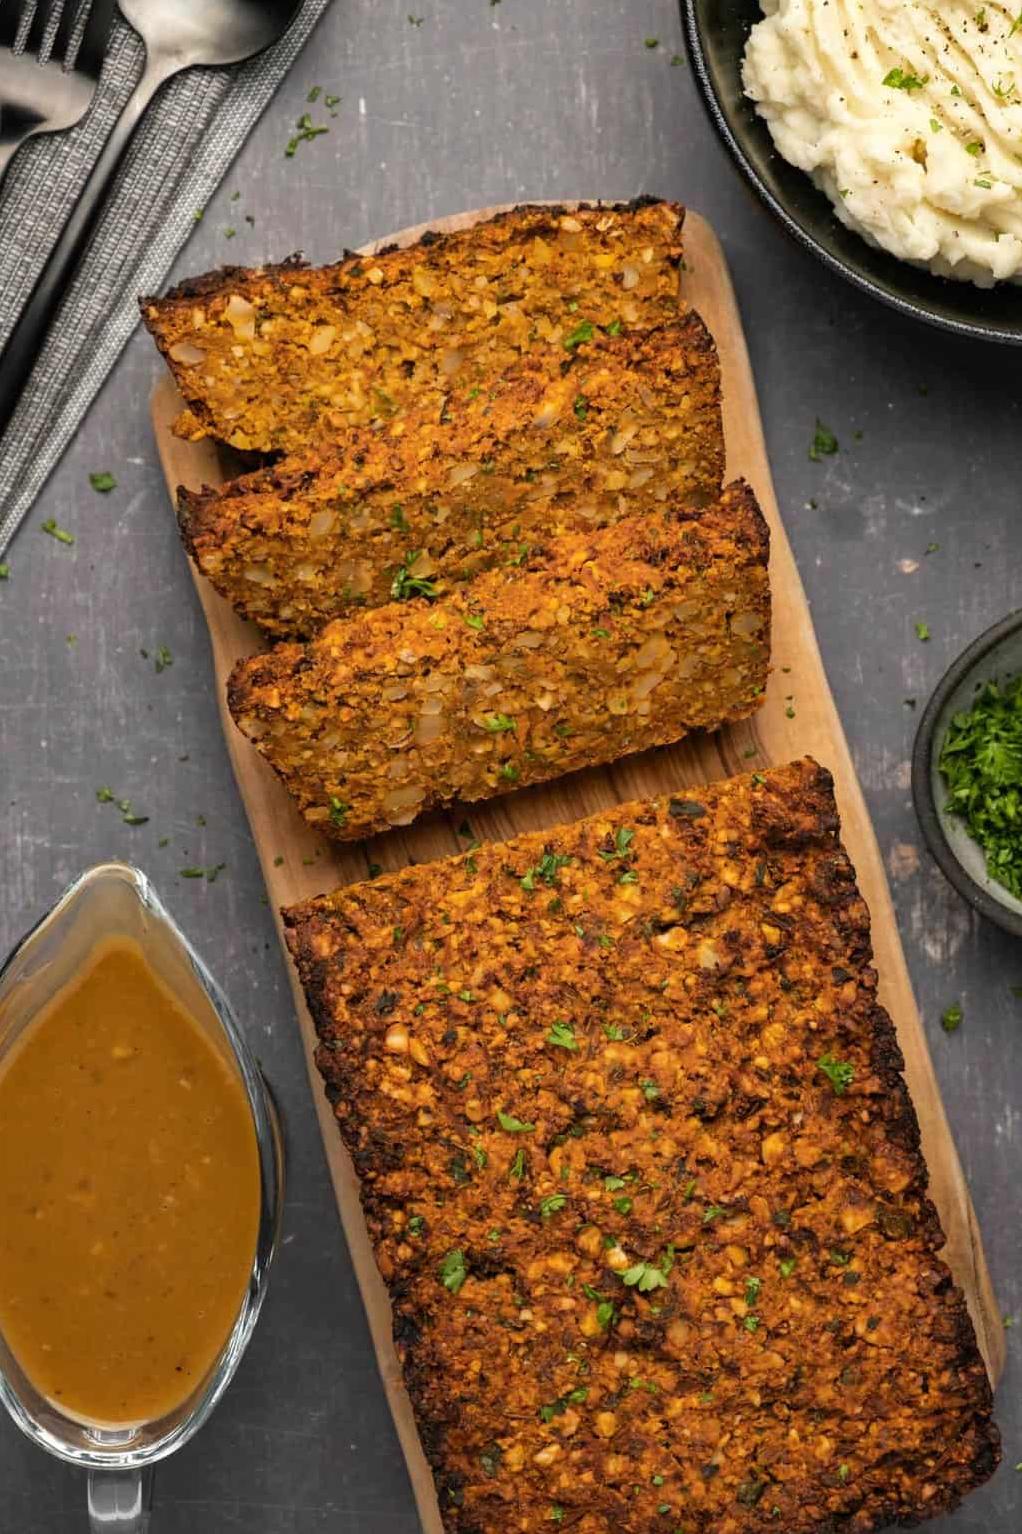  Meet your new favorite vegetarian dish: this Nut Loaf is packed with flavor and nutrition.